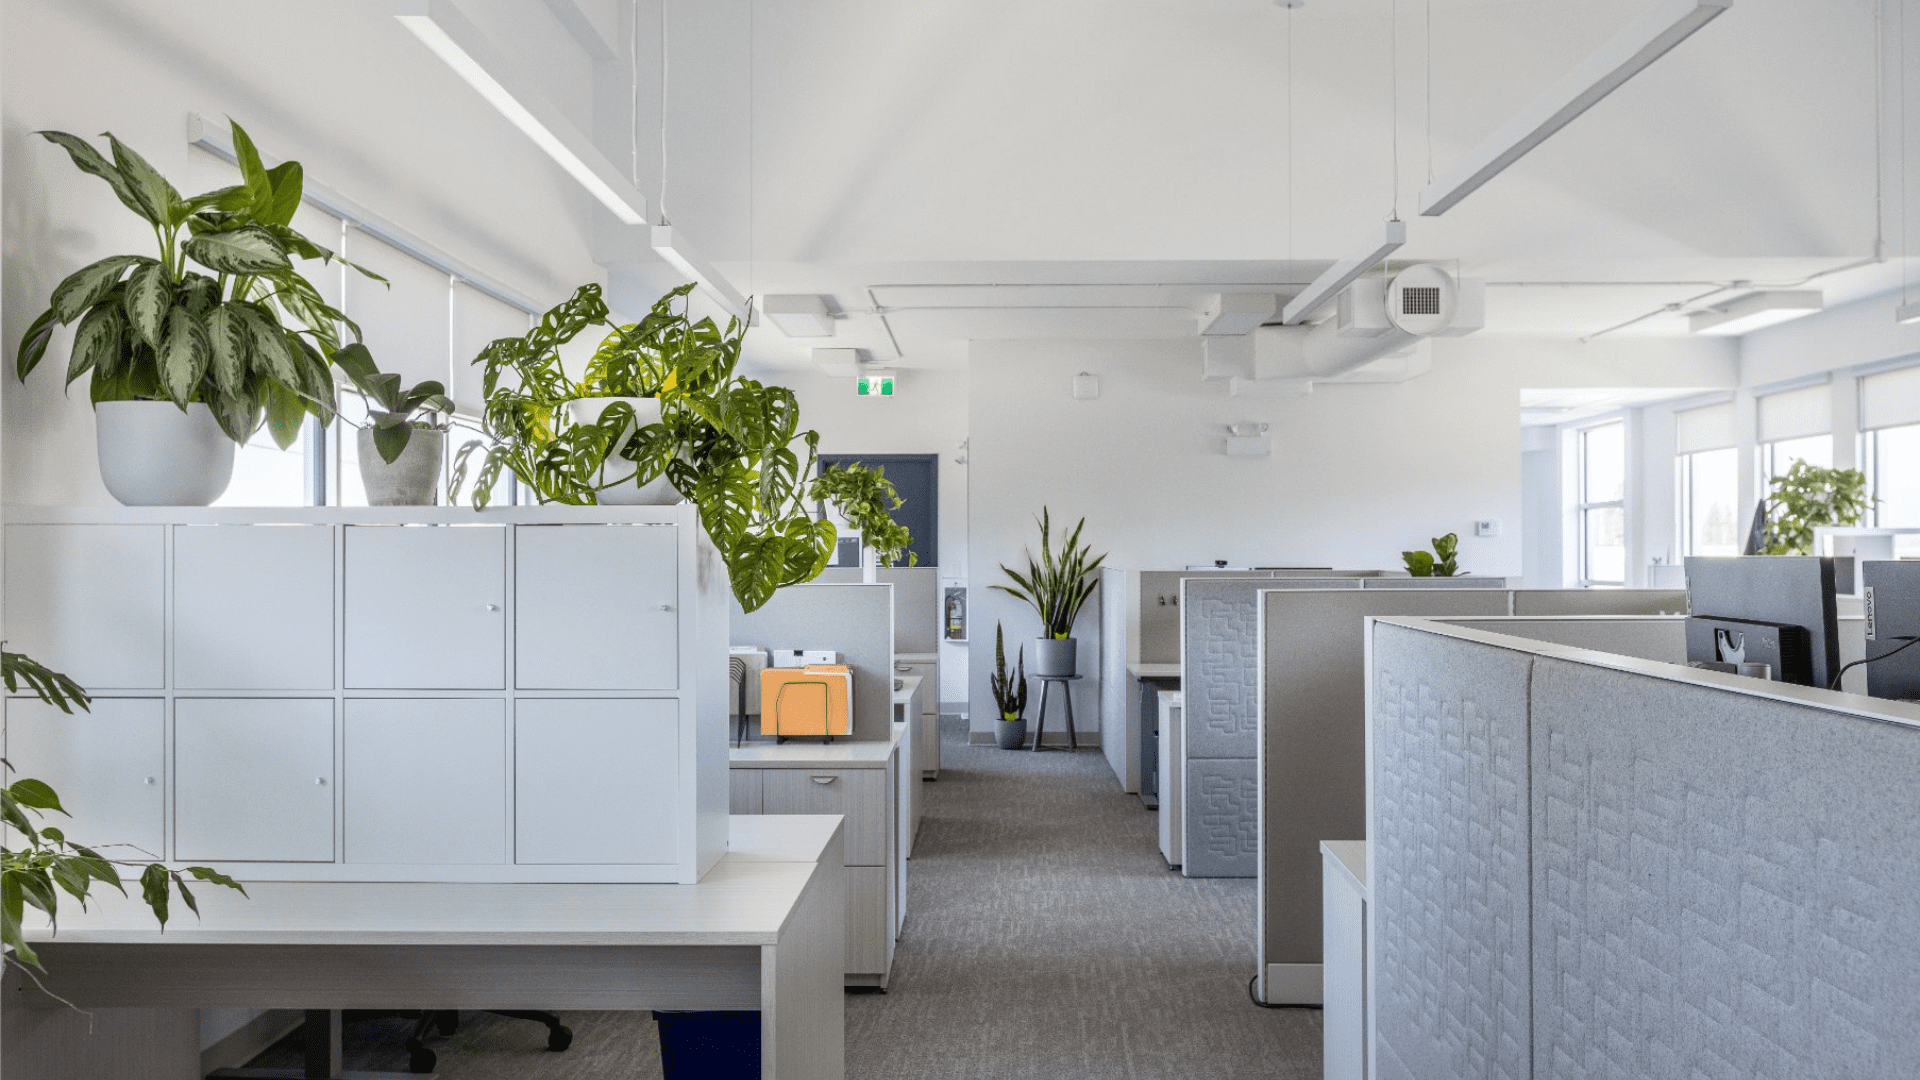 Aura Office | Workspace Layouts: Finding the Right Floorplan for your Office